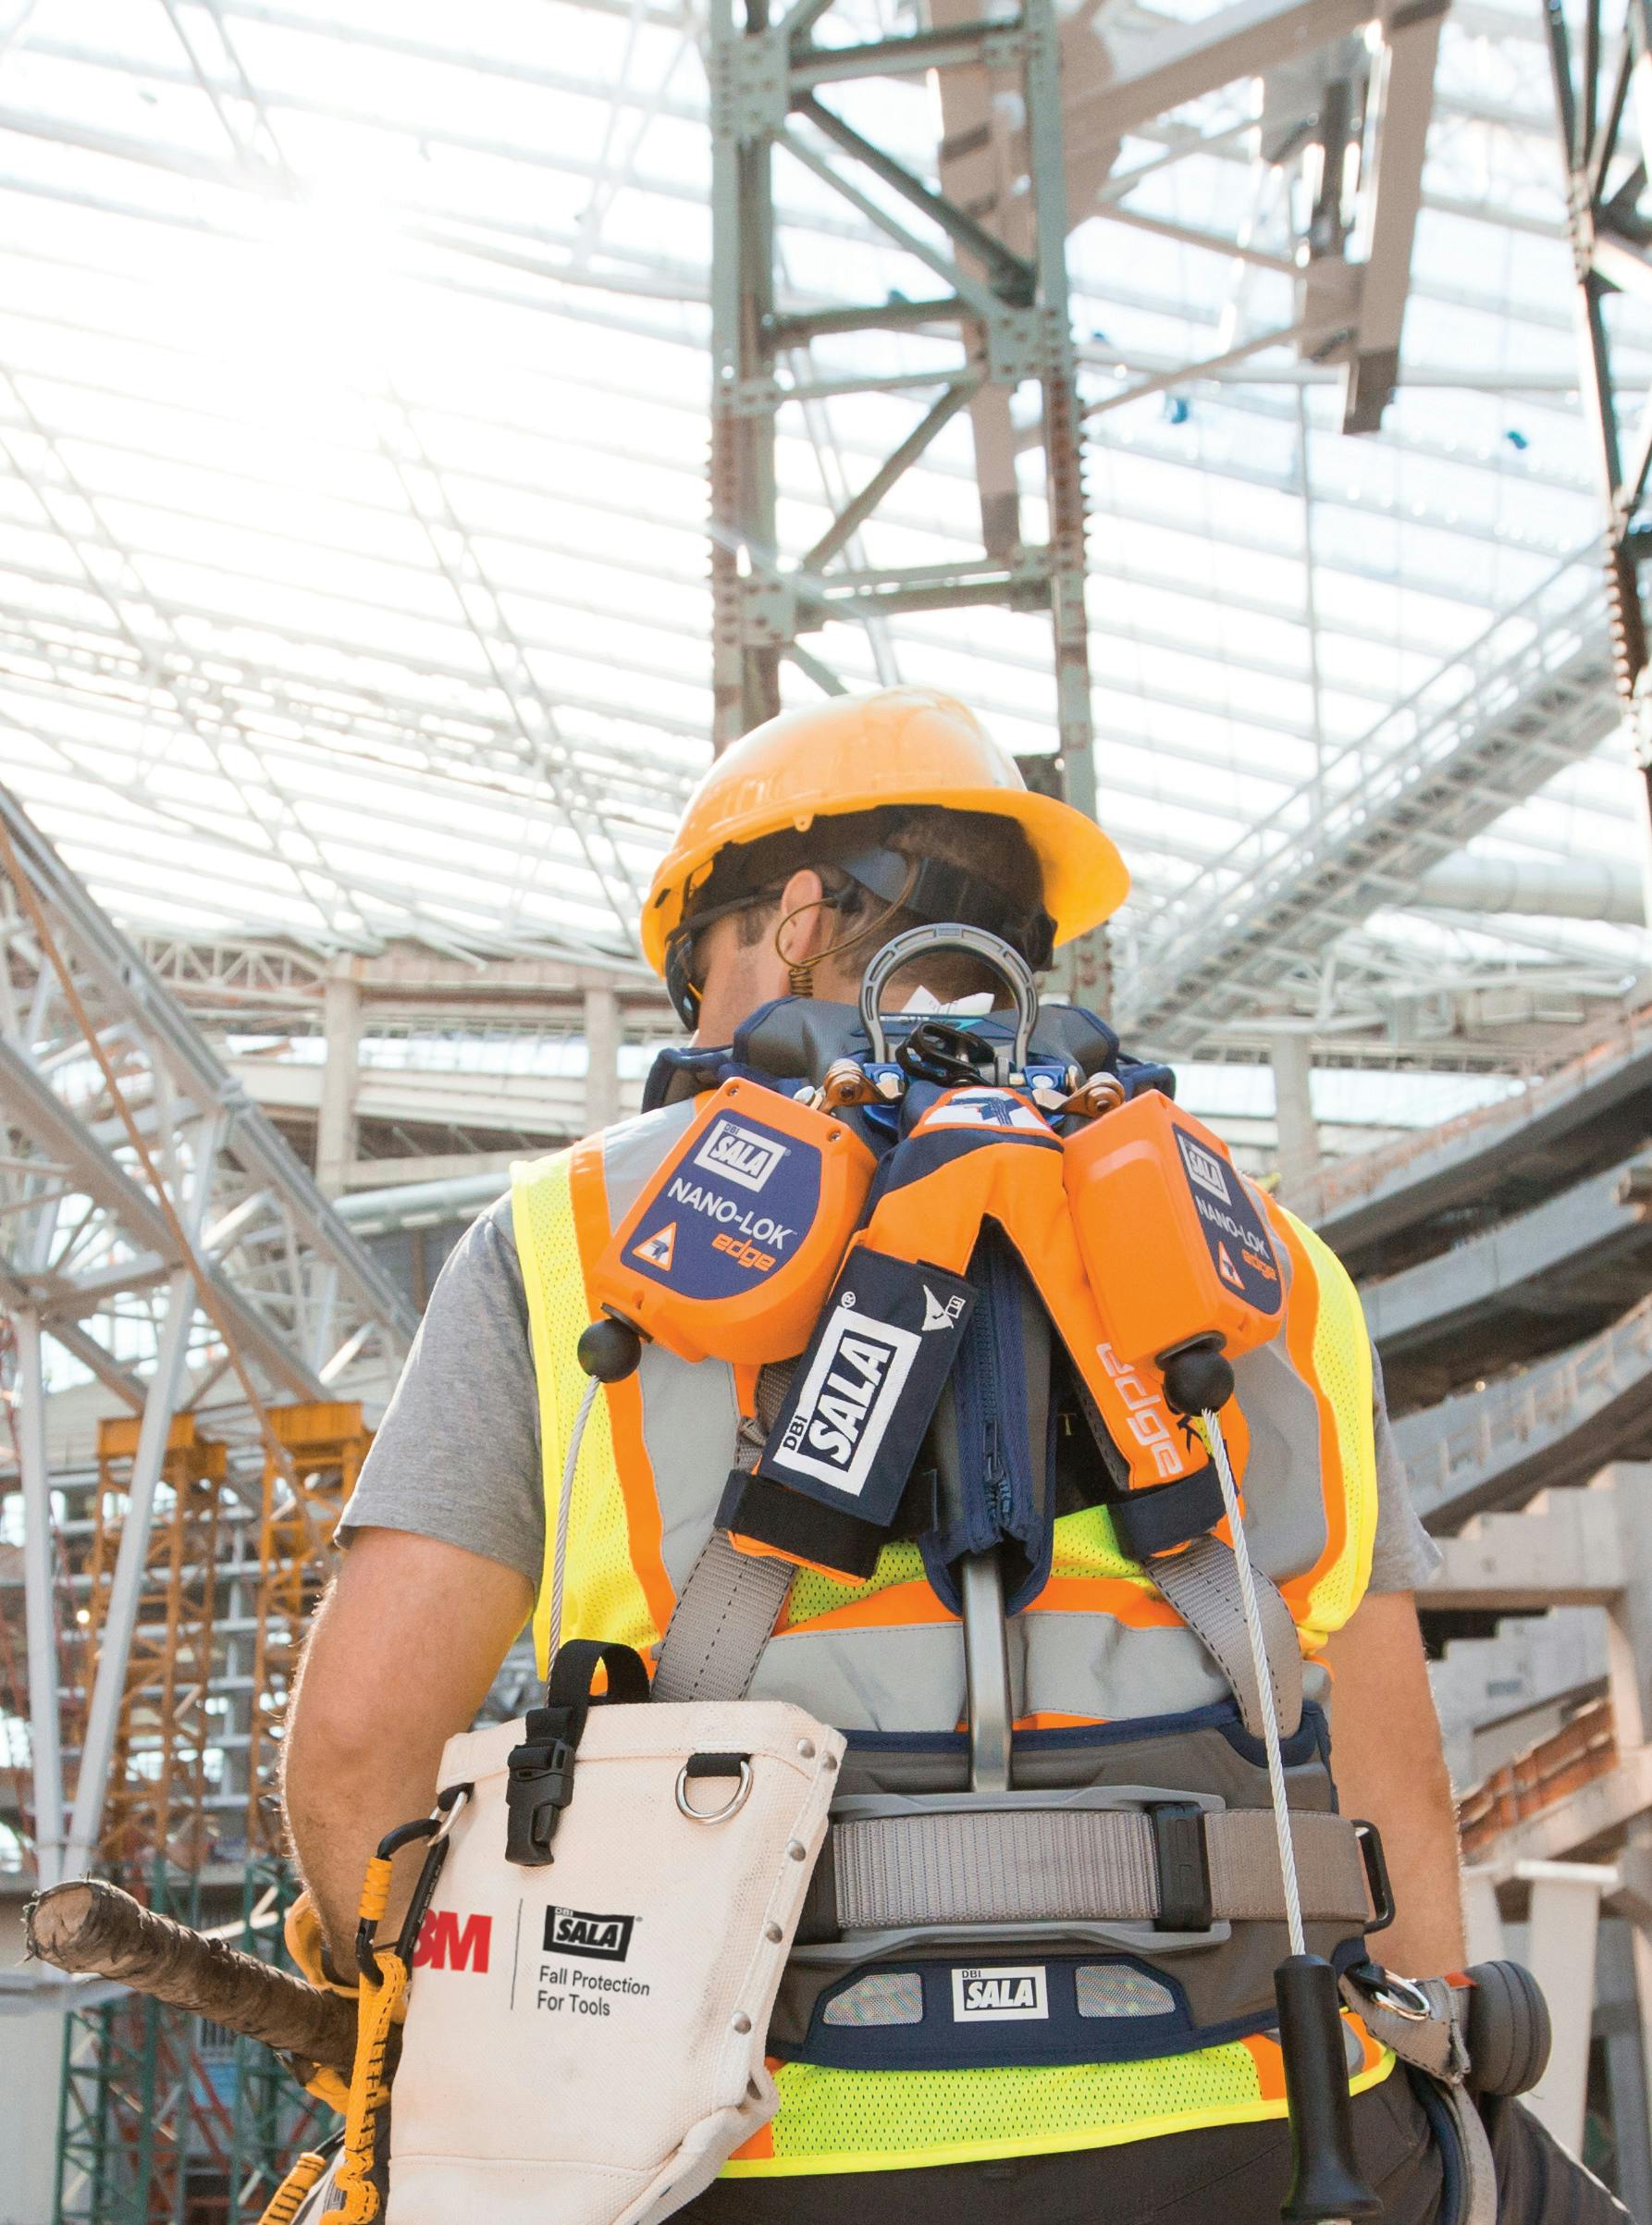 3M Featured Fall Protection During Safety Stand-Down | Construction News